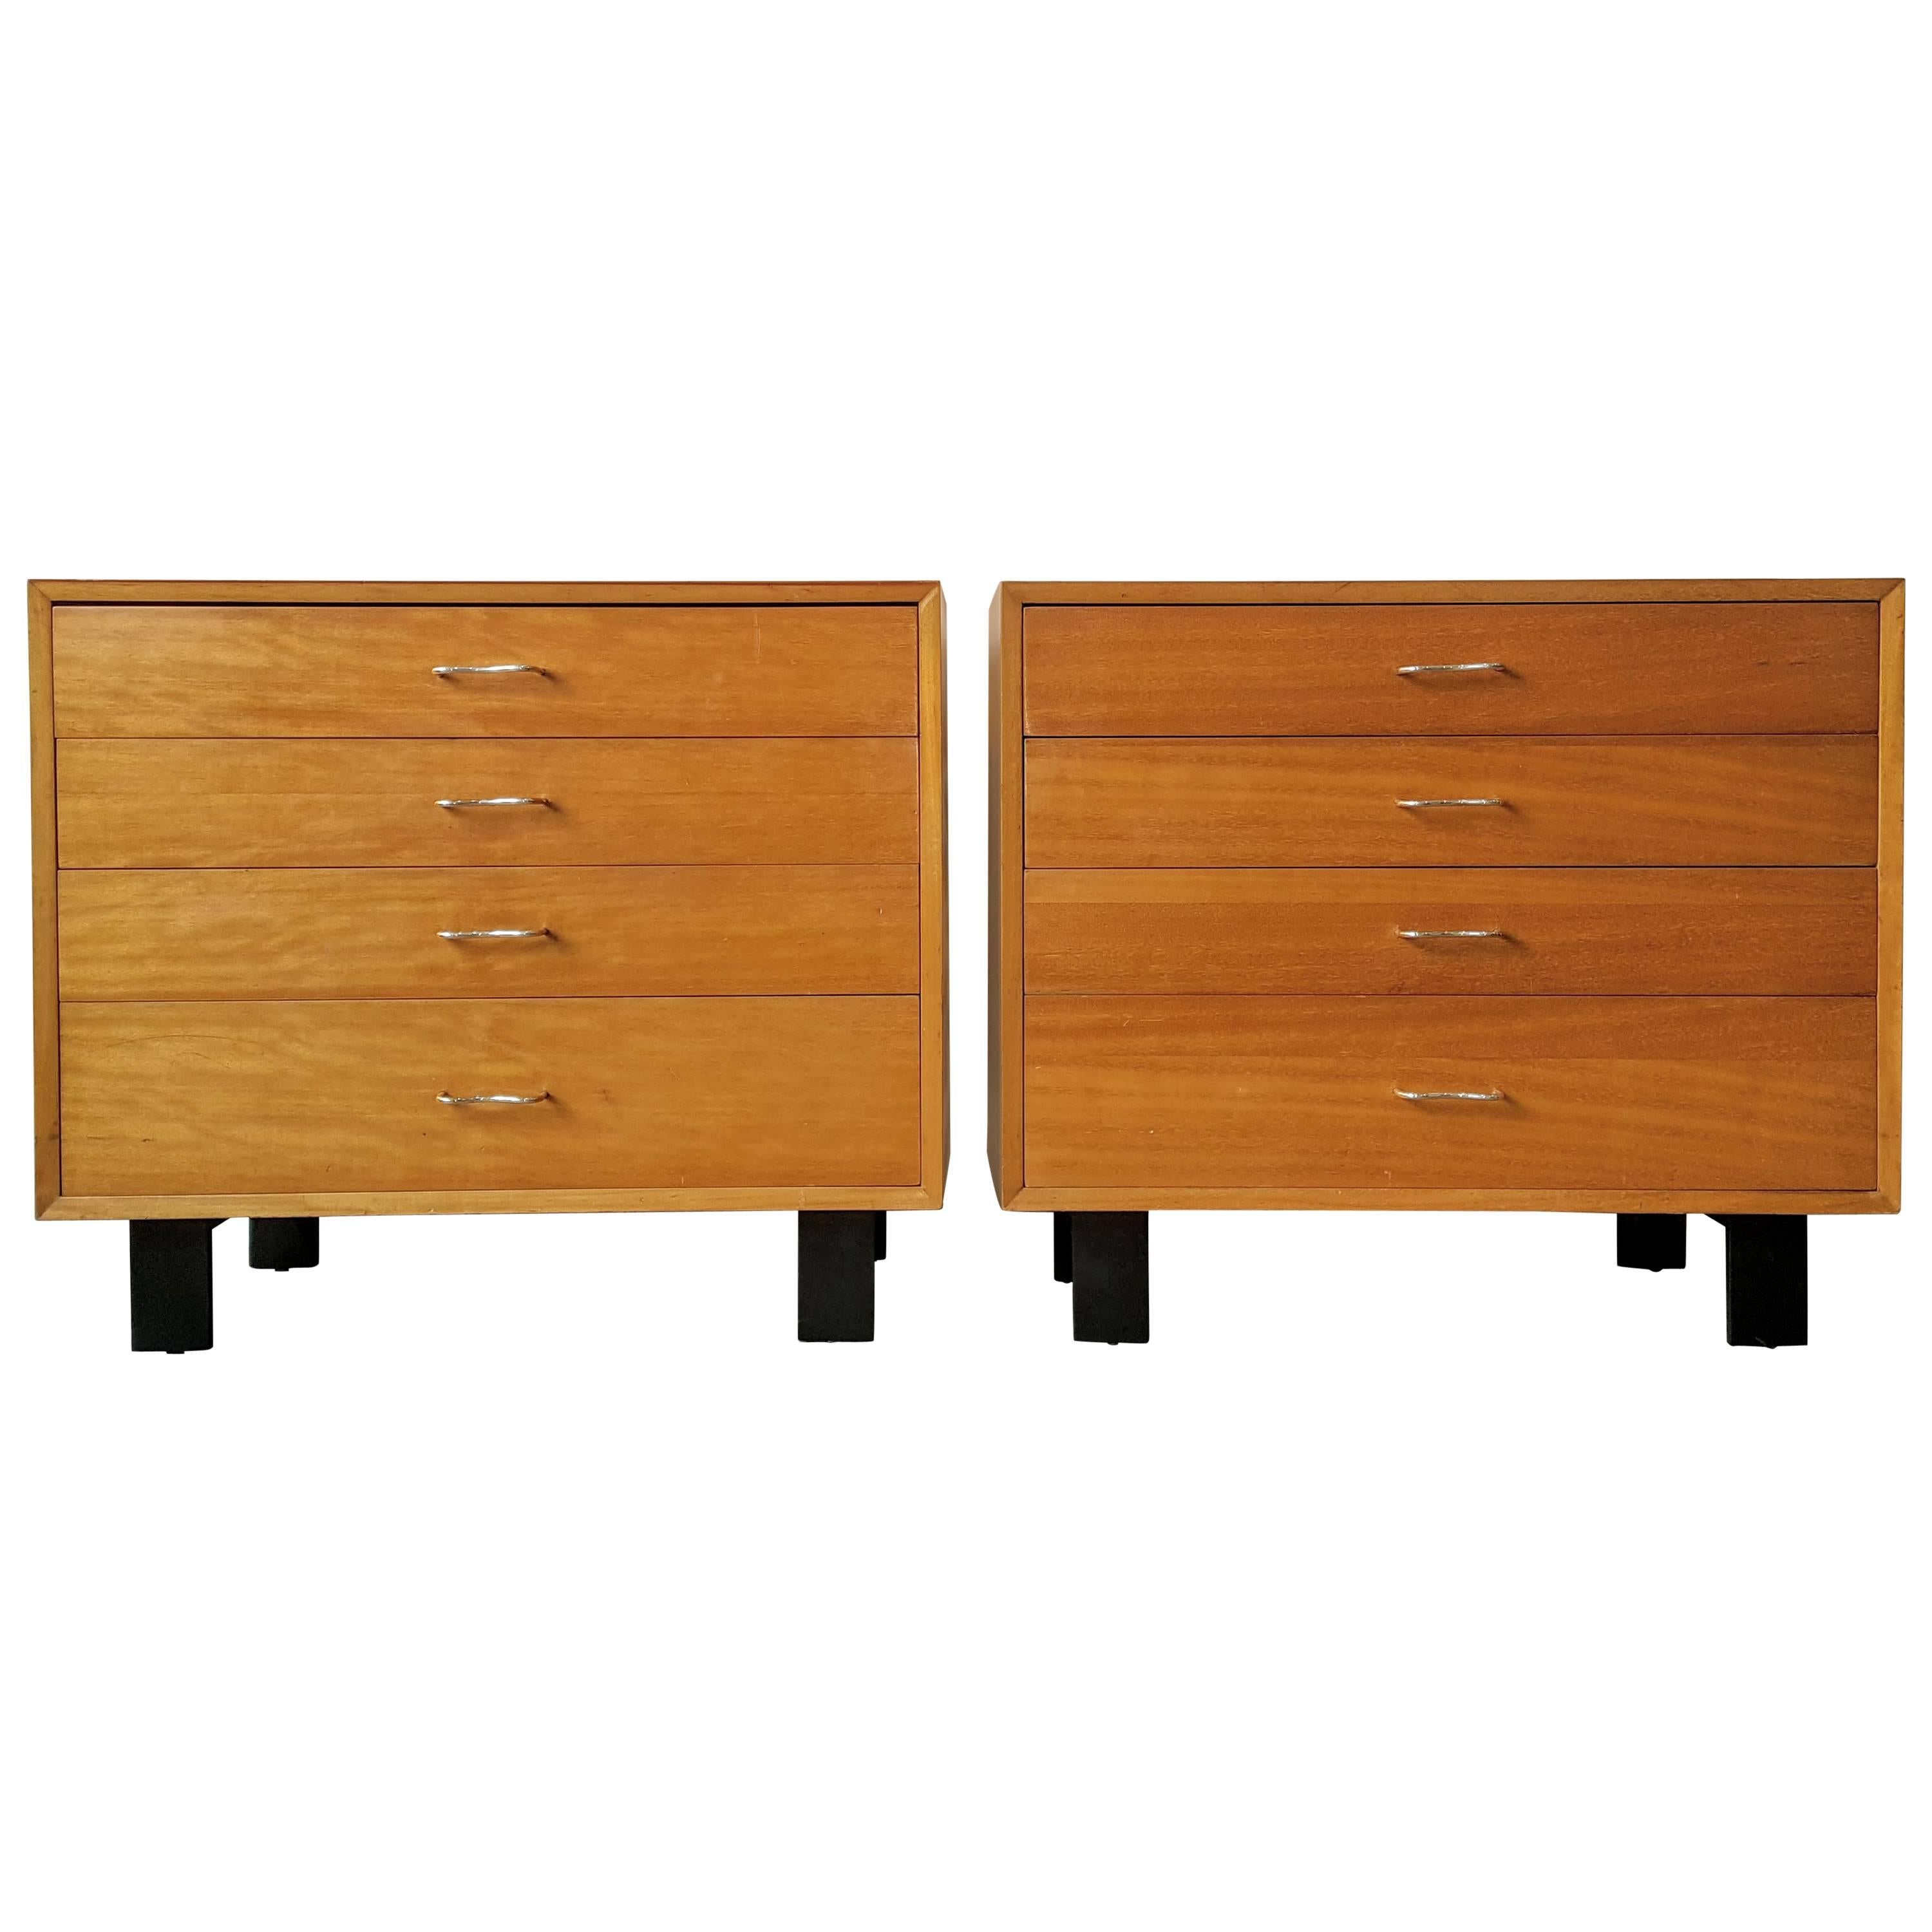 Pair of Mahogany Chests by George Nelson for Herman Miller, 1950s